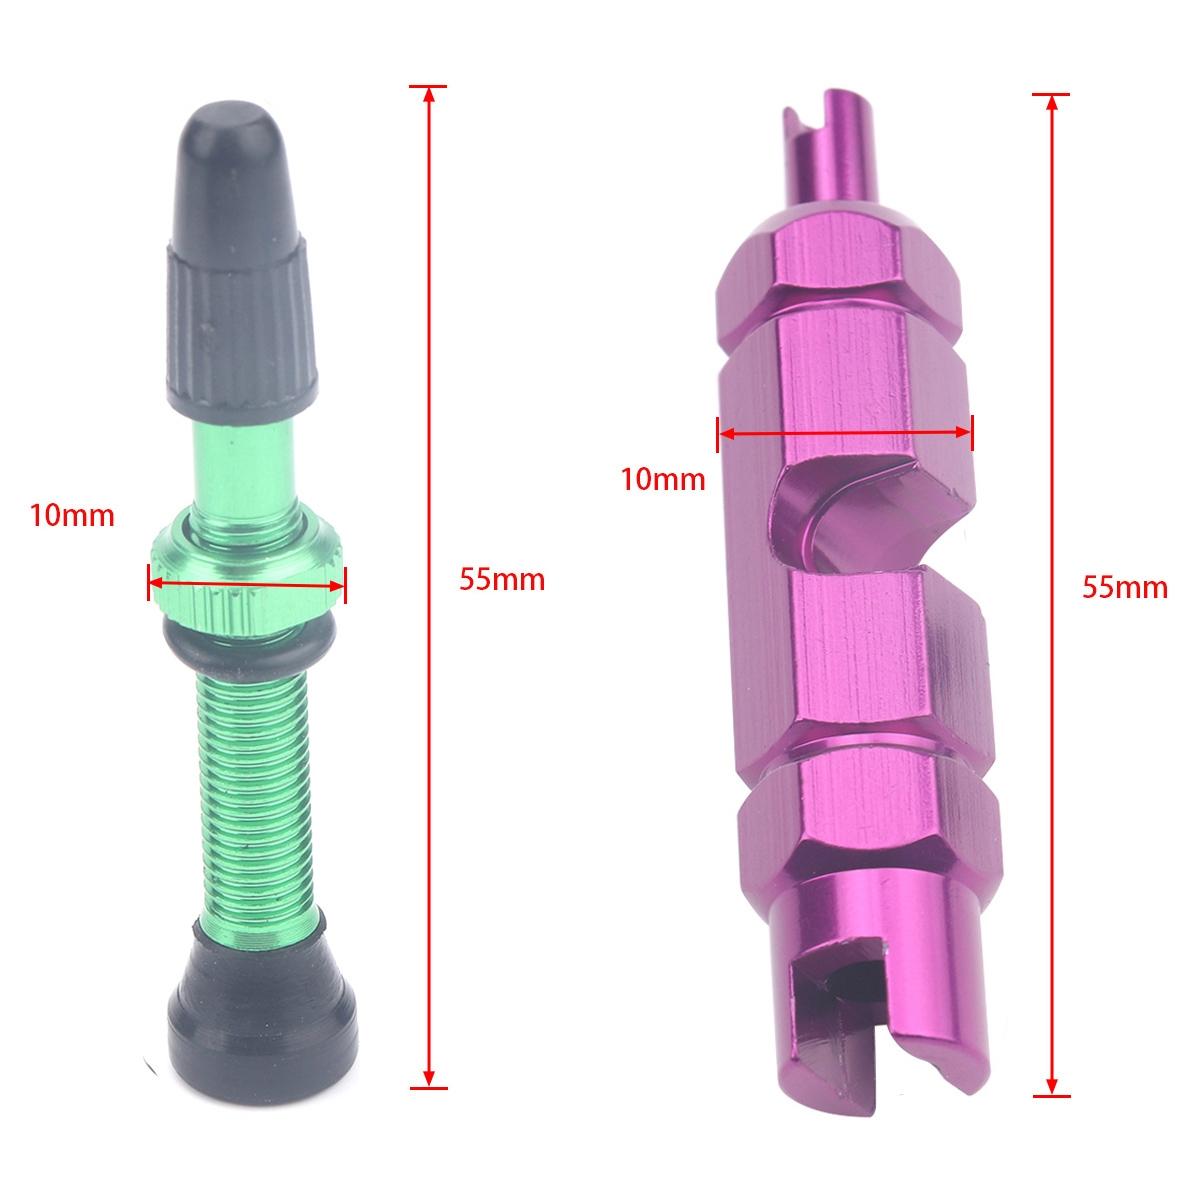 A5598 2 PCS 40mm Green French Tubeless Valve Core with Purple Disassembly Tool for Road Bike